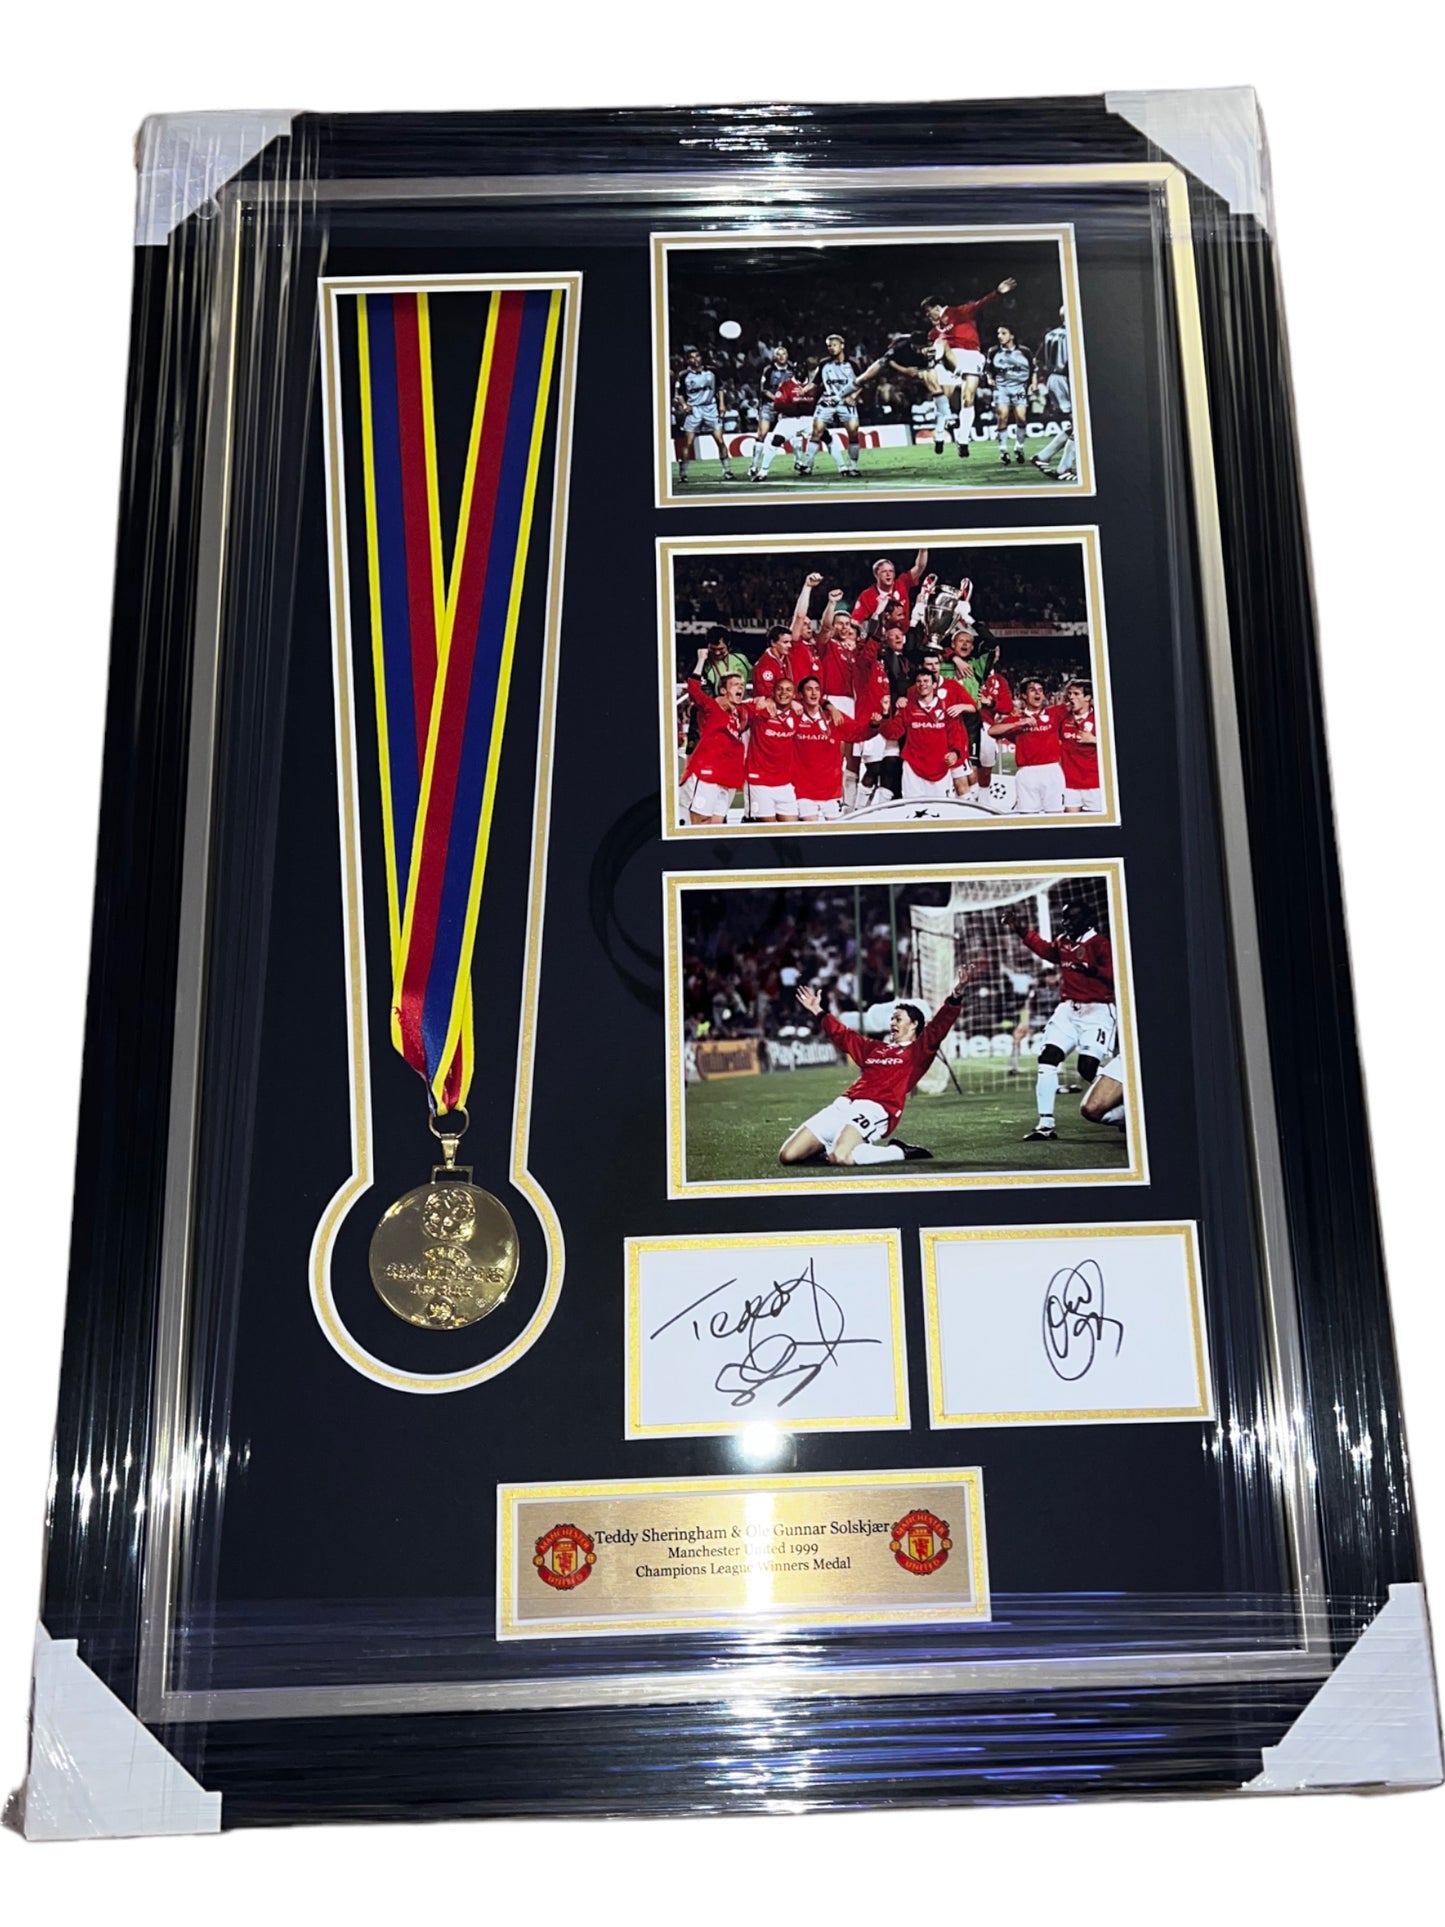 Manchester United 1999 Champions League Replica Medal signed by Teddy Sheringham and Ole Gunnar Solskjaer